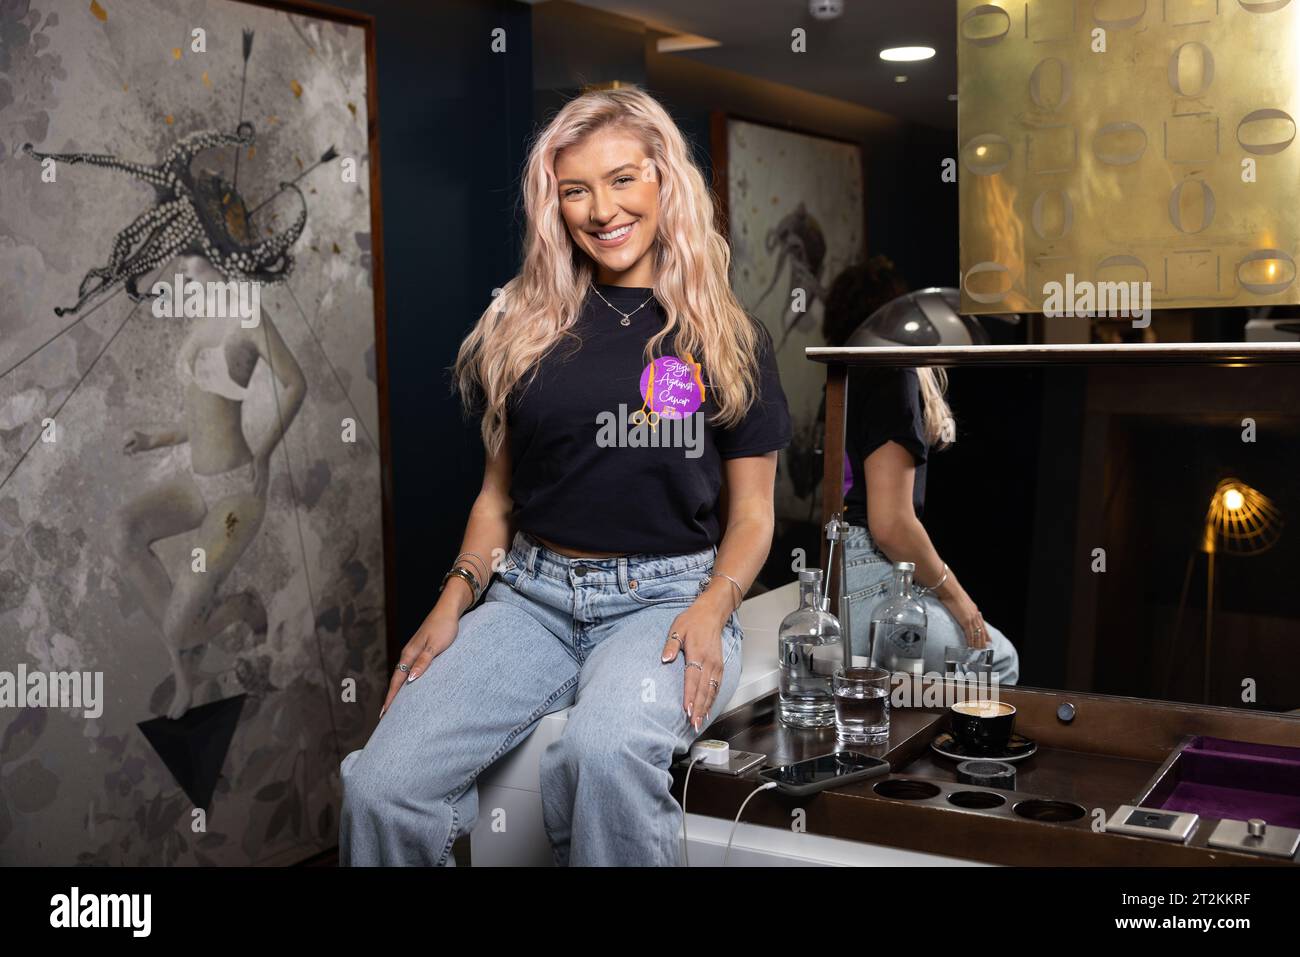 Molly Marsh 22-year-old musical theatre performer and social media creator from Doncaster on shoot for Children With Cancer charity at Studio64, Soho. Stock Photo